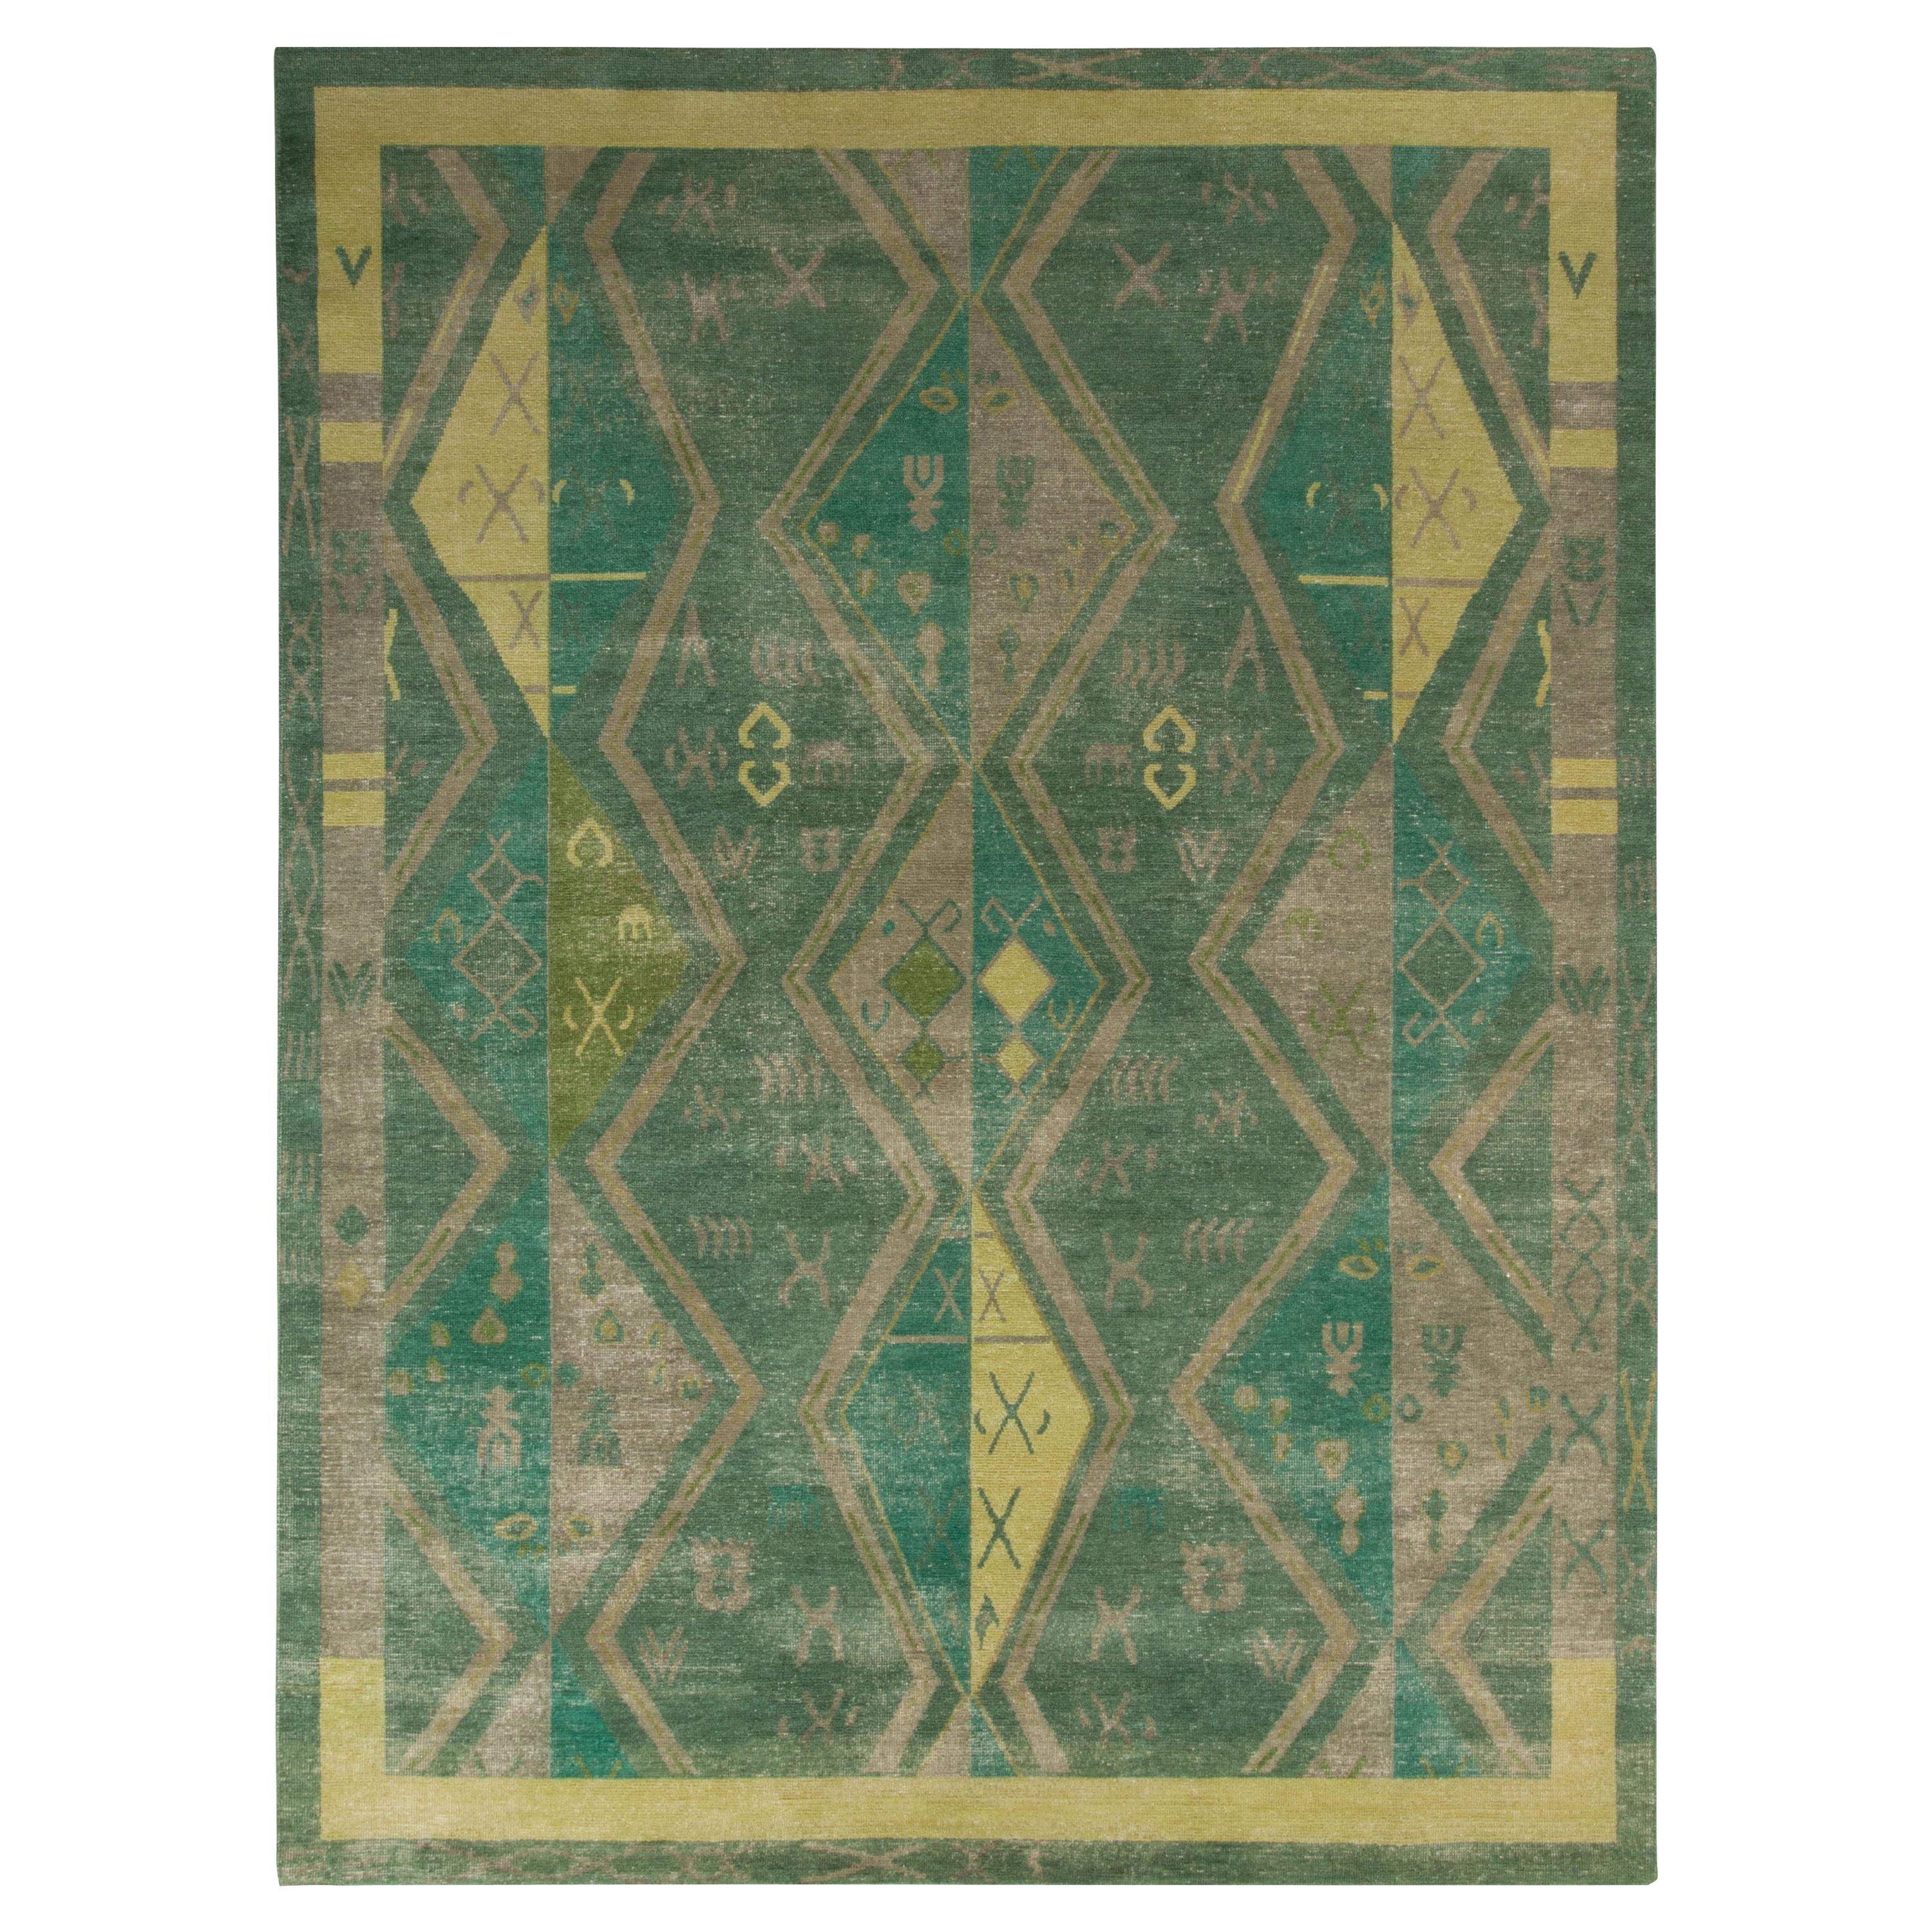 Rug & Kilim’s Distressed Style Classic Rug in Green, Beige-Brown Geometric Patte For Sale